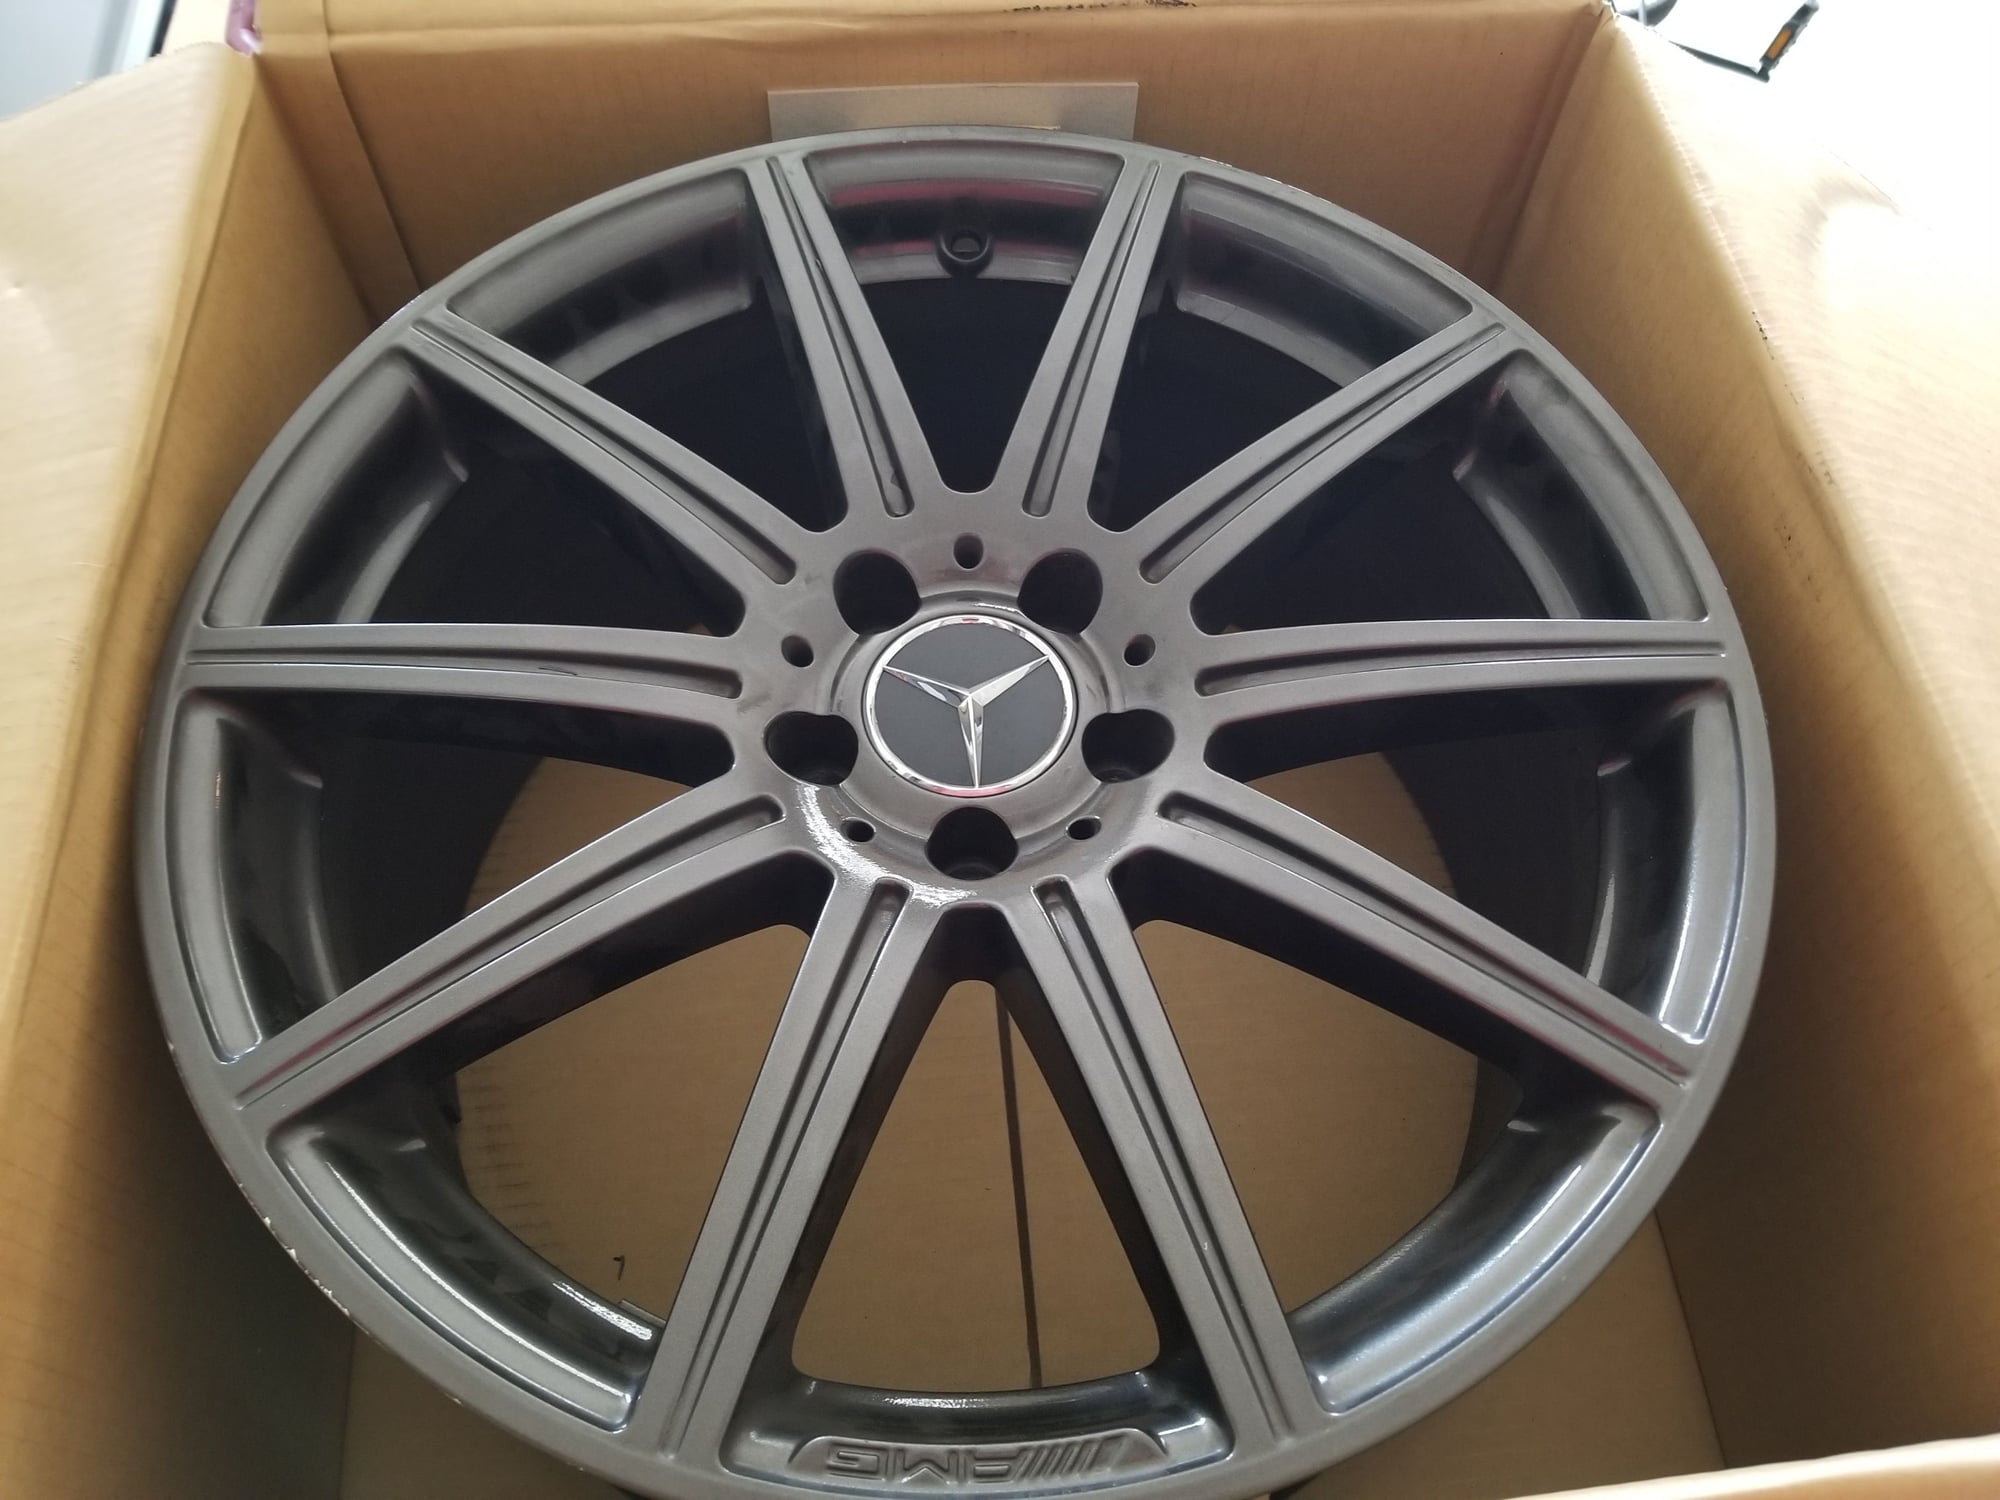 Wheels and Tires/Axles - WHEELS 2014 E 63 AMG S - Used - 2014 to 2015 Mercedes-Benz E63 AMG S - Boise, ID 83713, United States